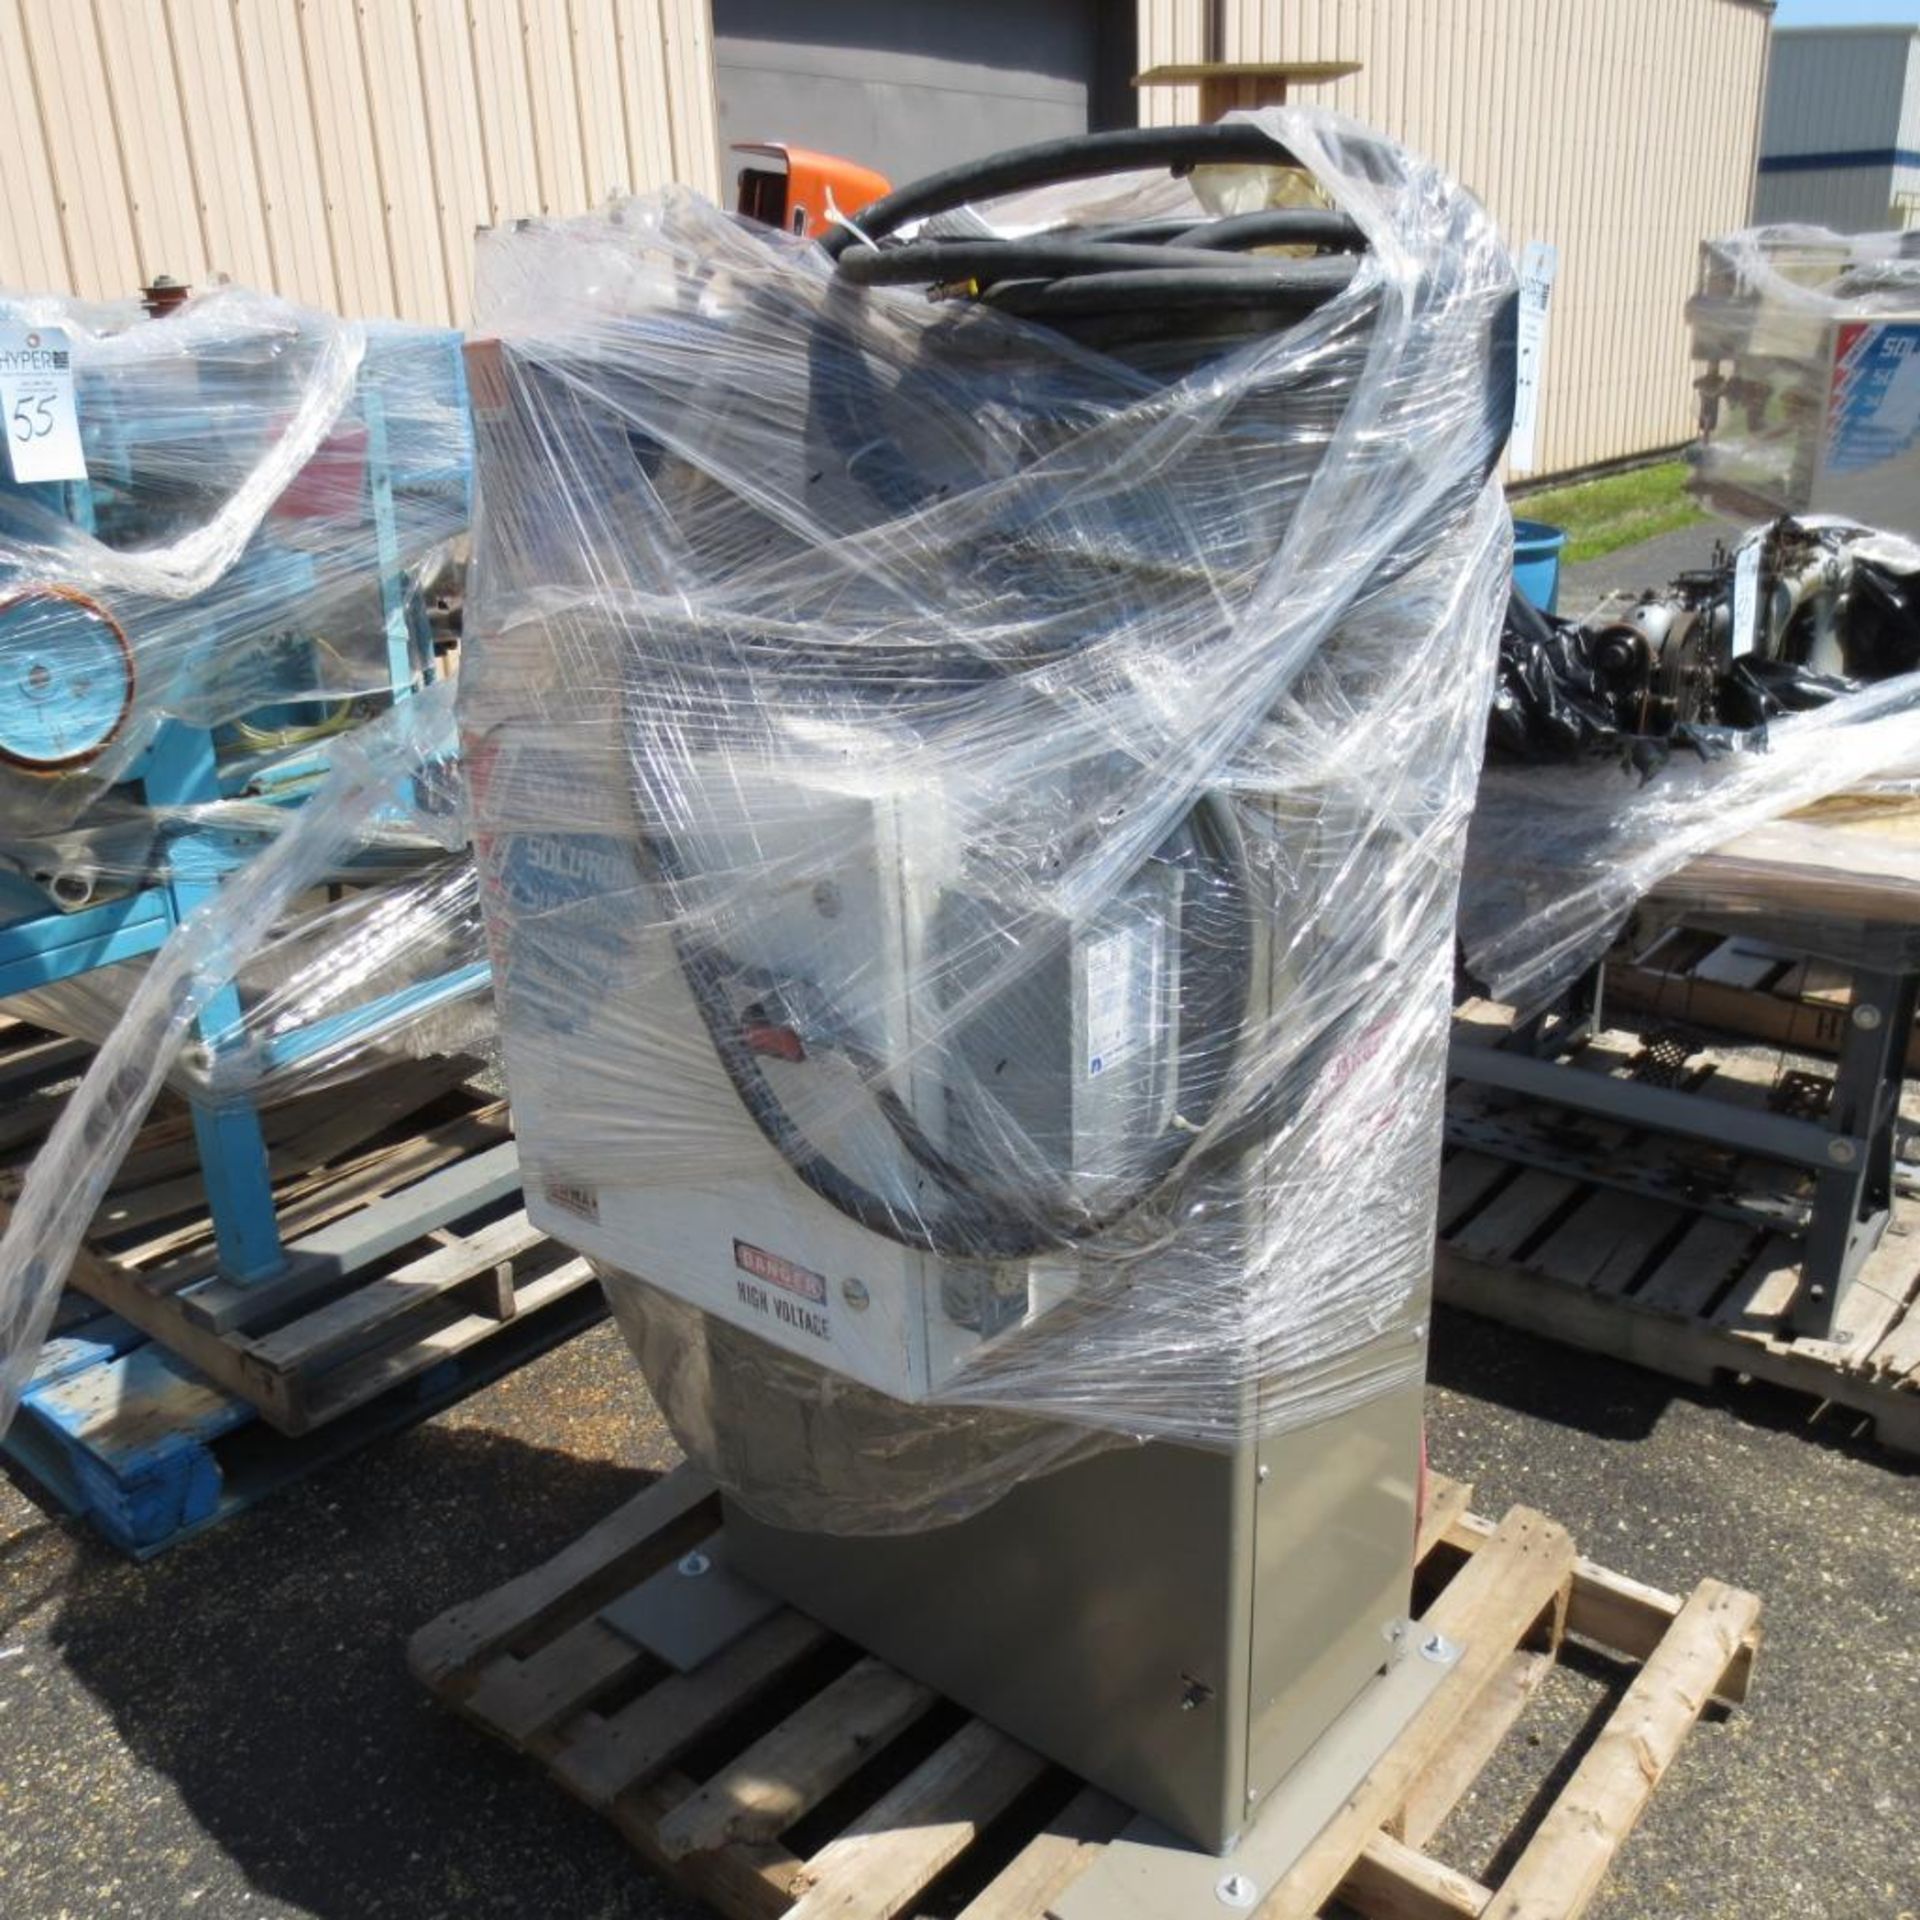 Taylor Winfield 30 KVA Type EBB3-8-30 Spot Welder S/N: 90296-A, 30 KVA located at 707 Burlington Ave - Image 5 of 5